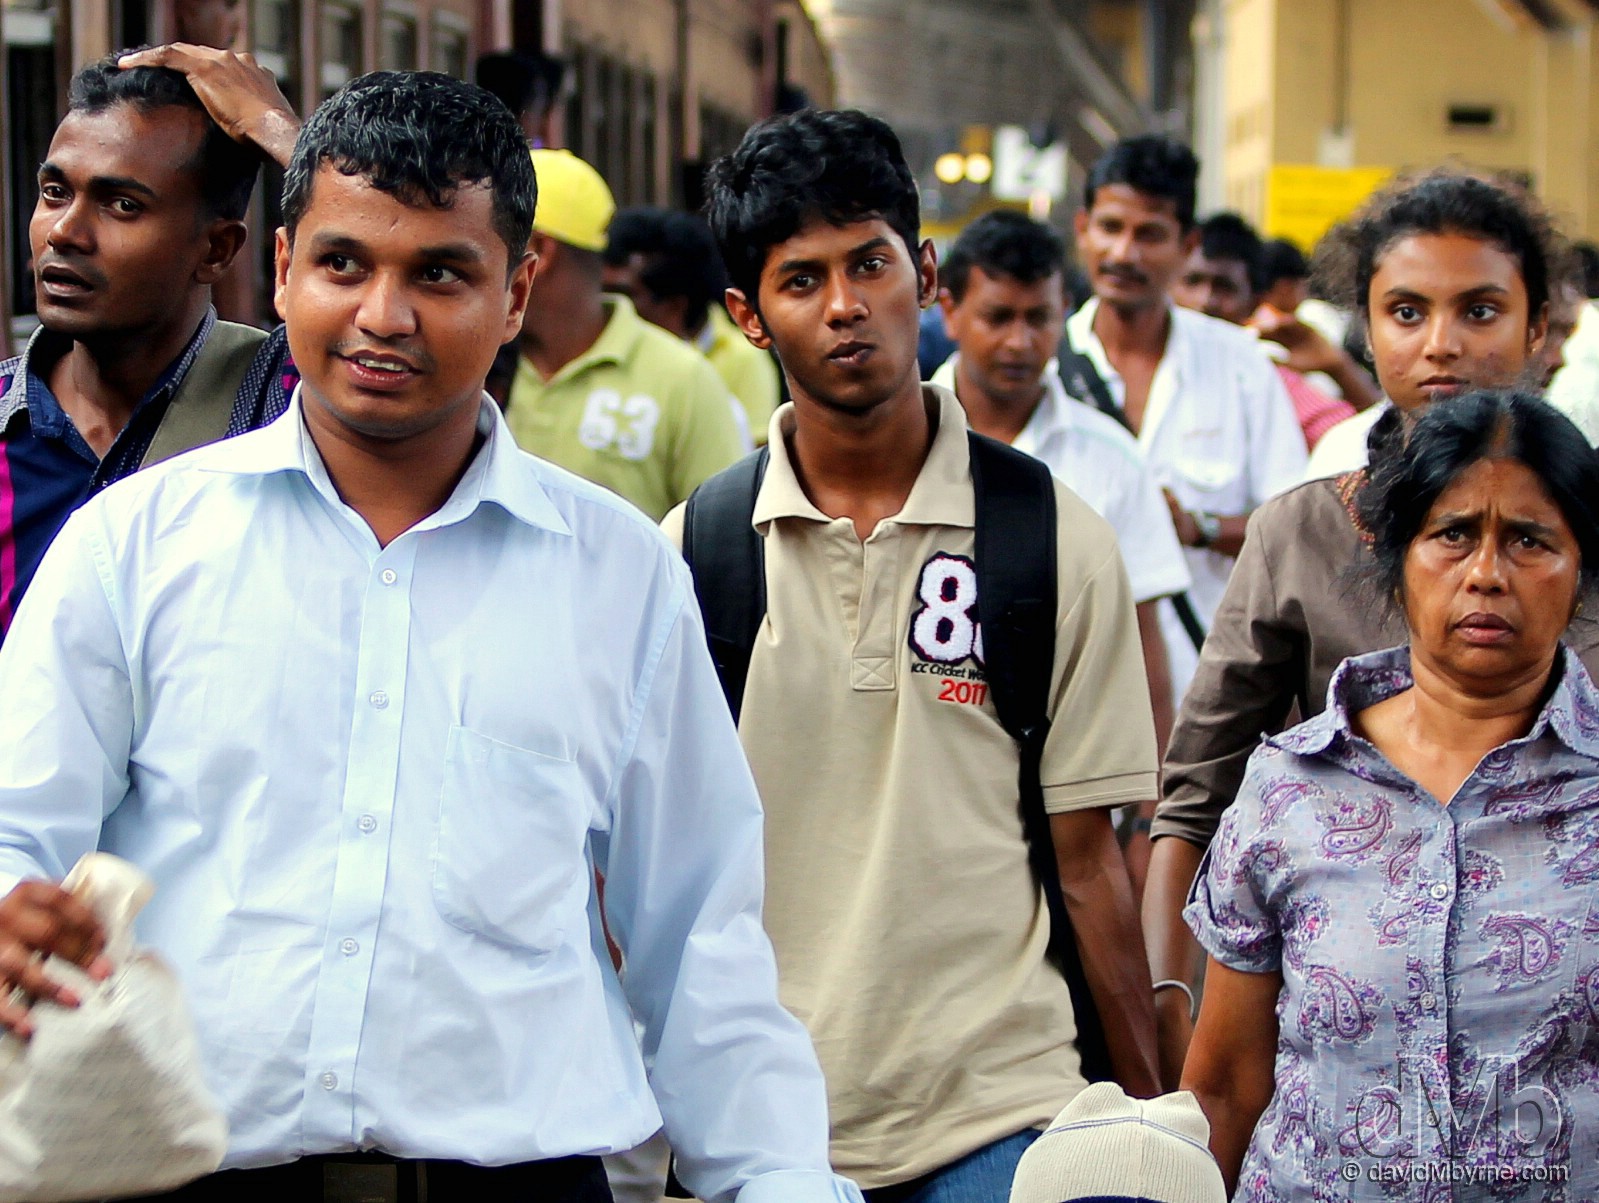 On the march in Galle train station, Southern Sri Lanka, August 31st, 2012 (EOS 60D || Canon 70-300mm || 70mm, 1/125sec, f/4.5, iso100)